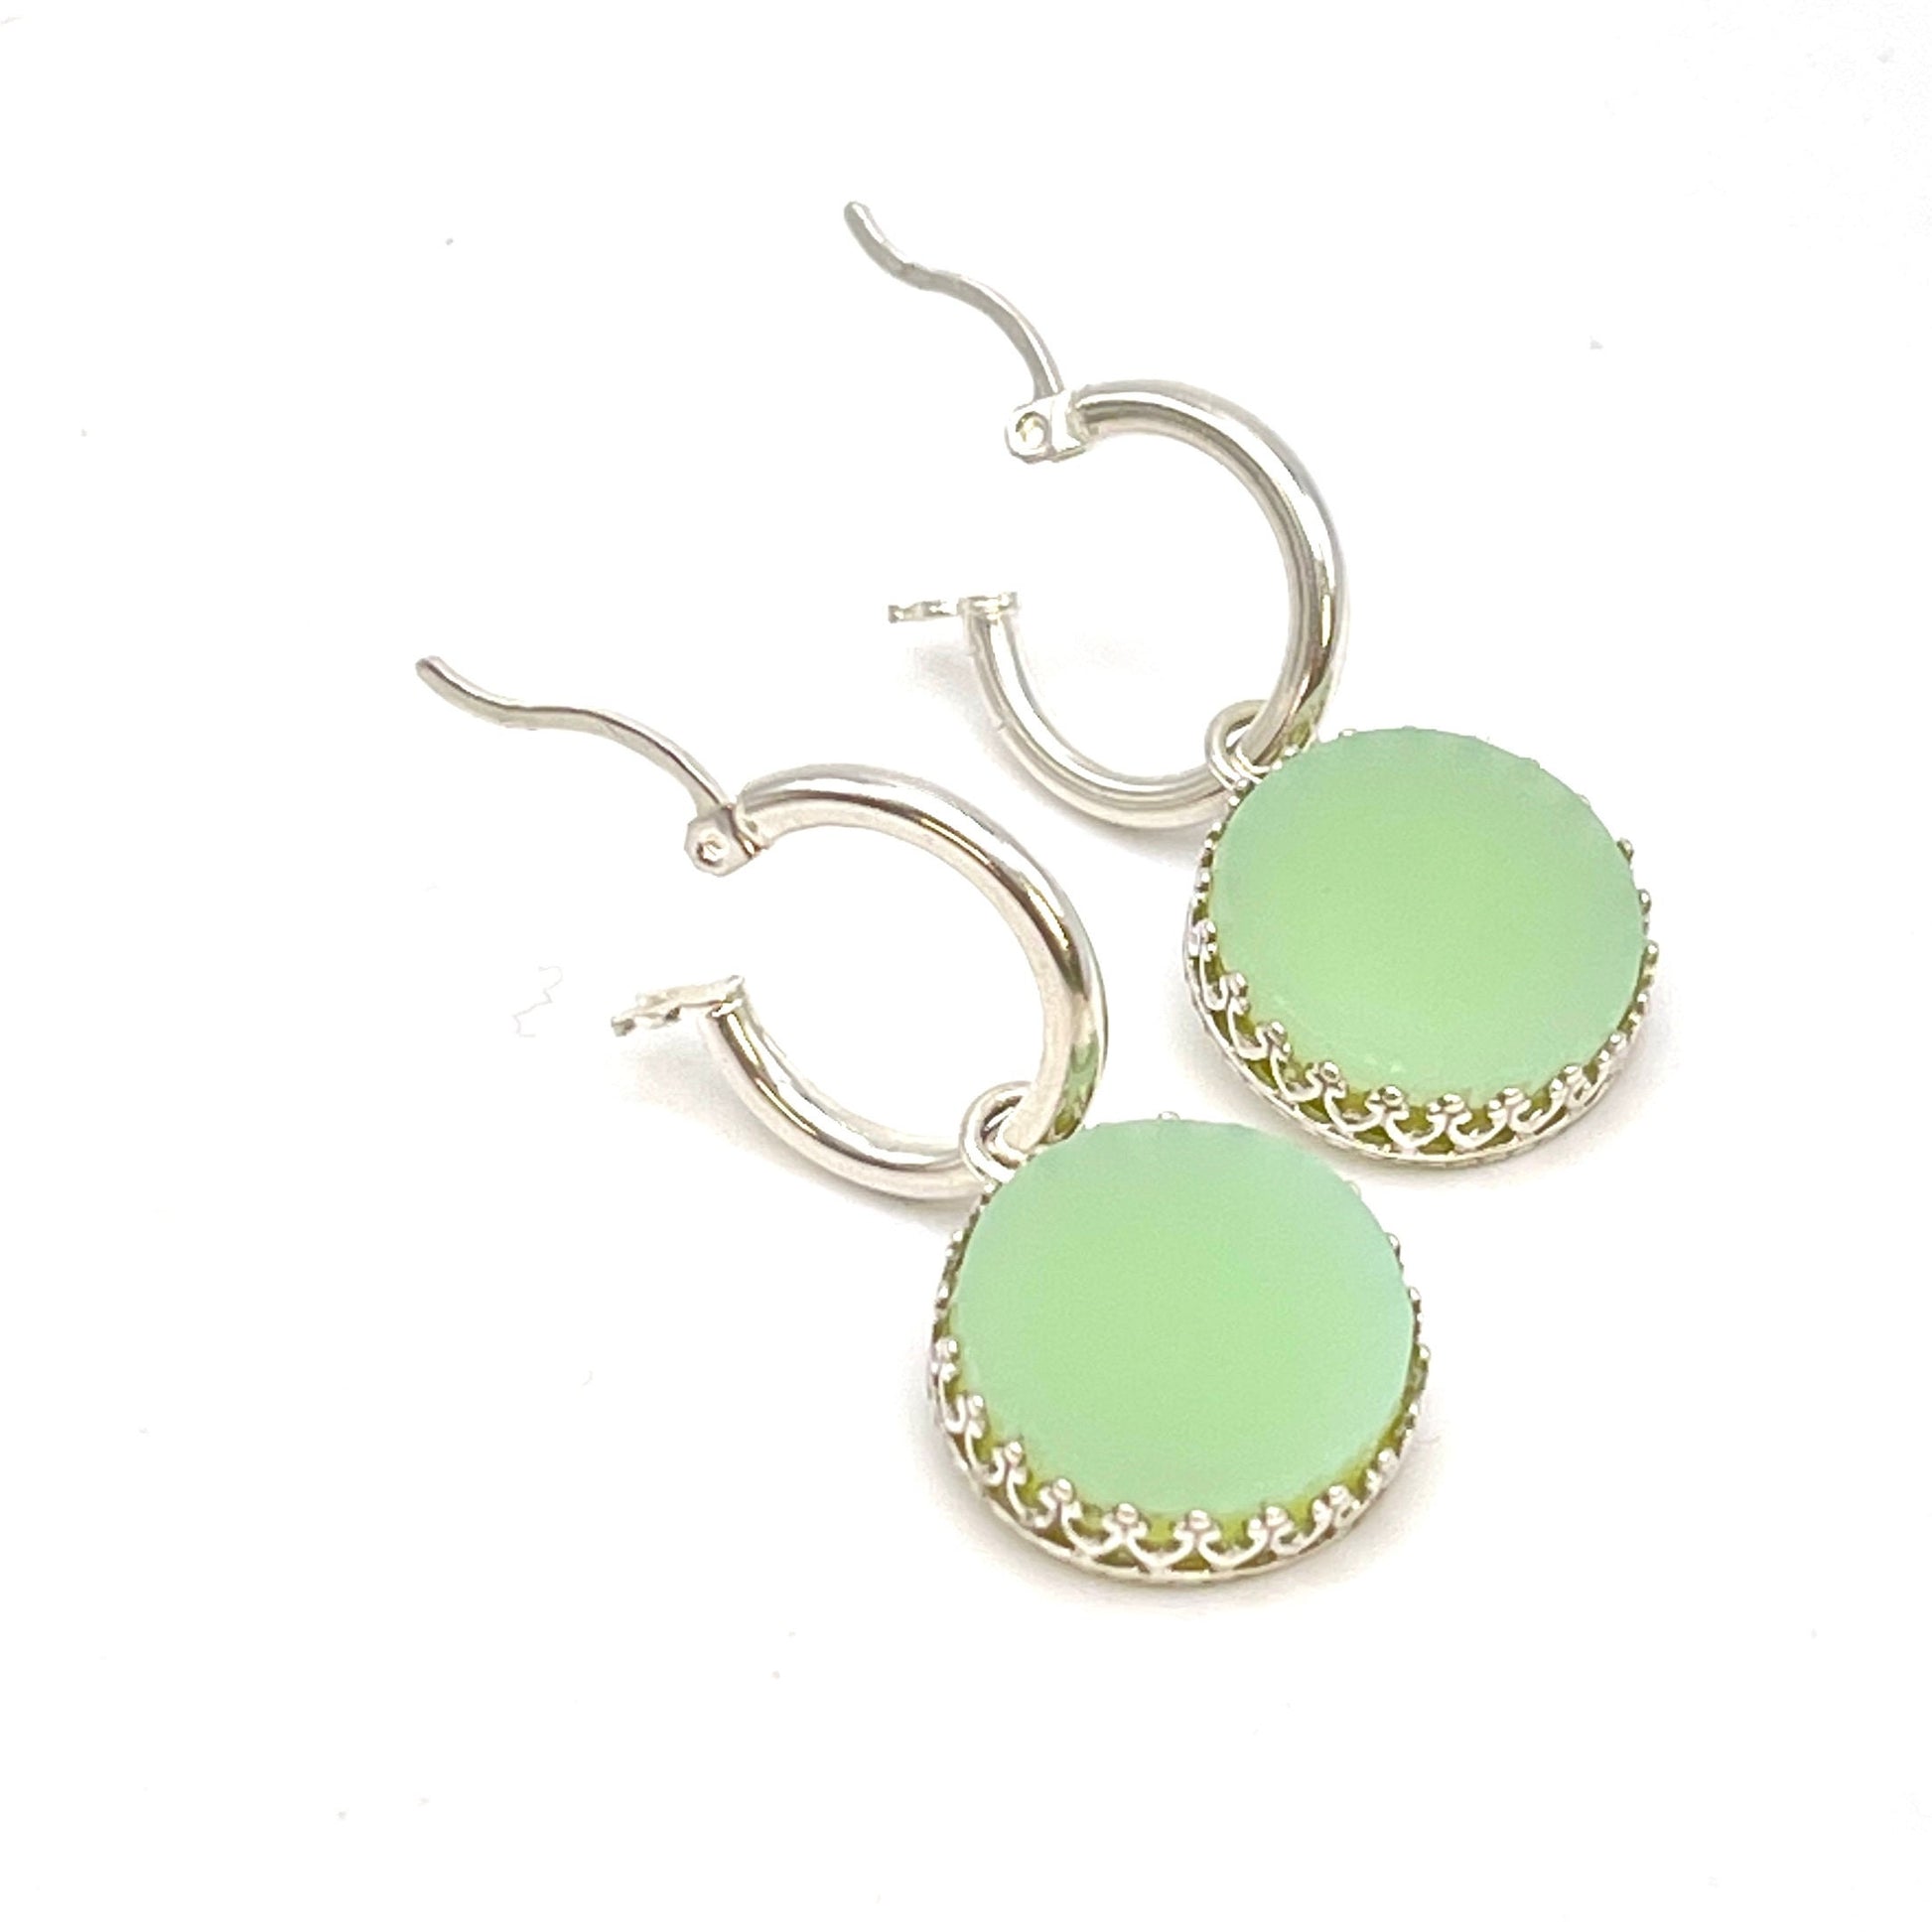 Fire King Jadeite Dangle Earrings, Unique Gifts for Wife, Broken China Jewelry, Sterling Silver Hoops